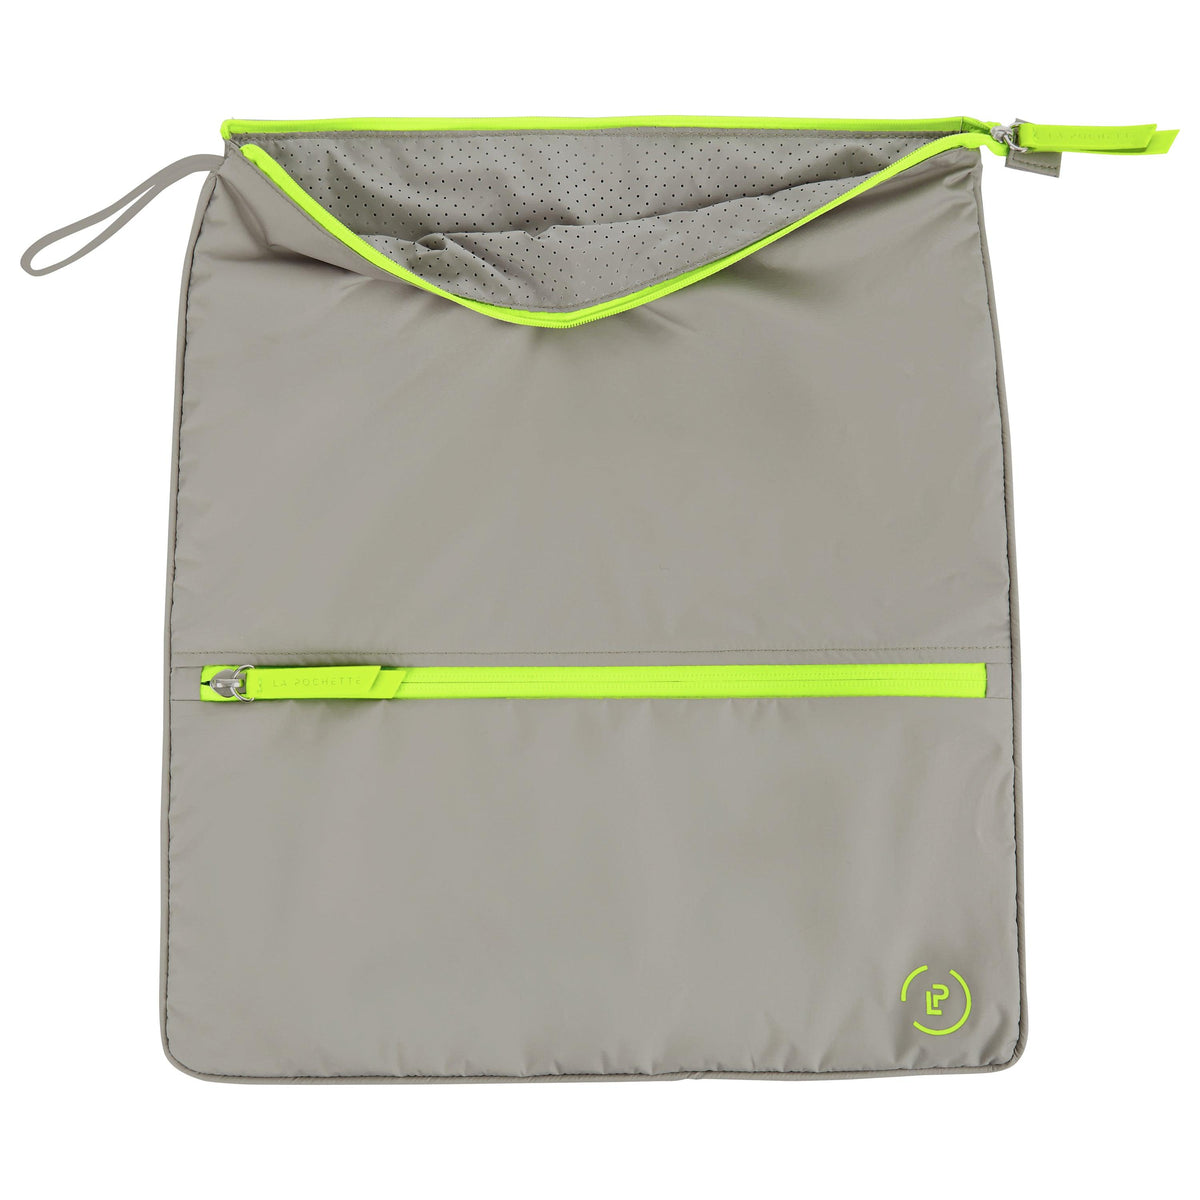 Walnut Neon Green Sweat Bag lying flat, showing unzipped top to reveal inner perforated grey lining